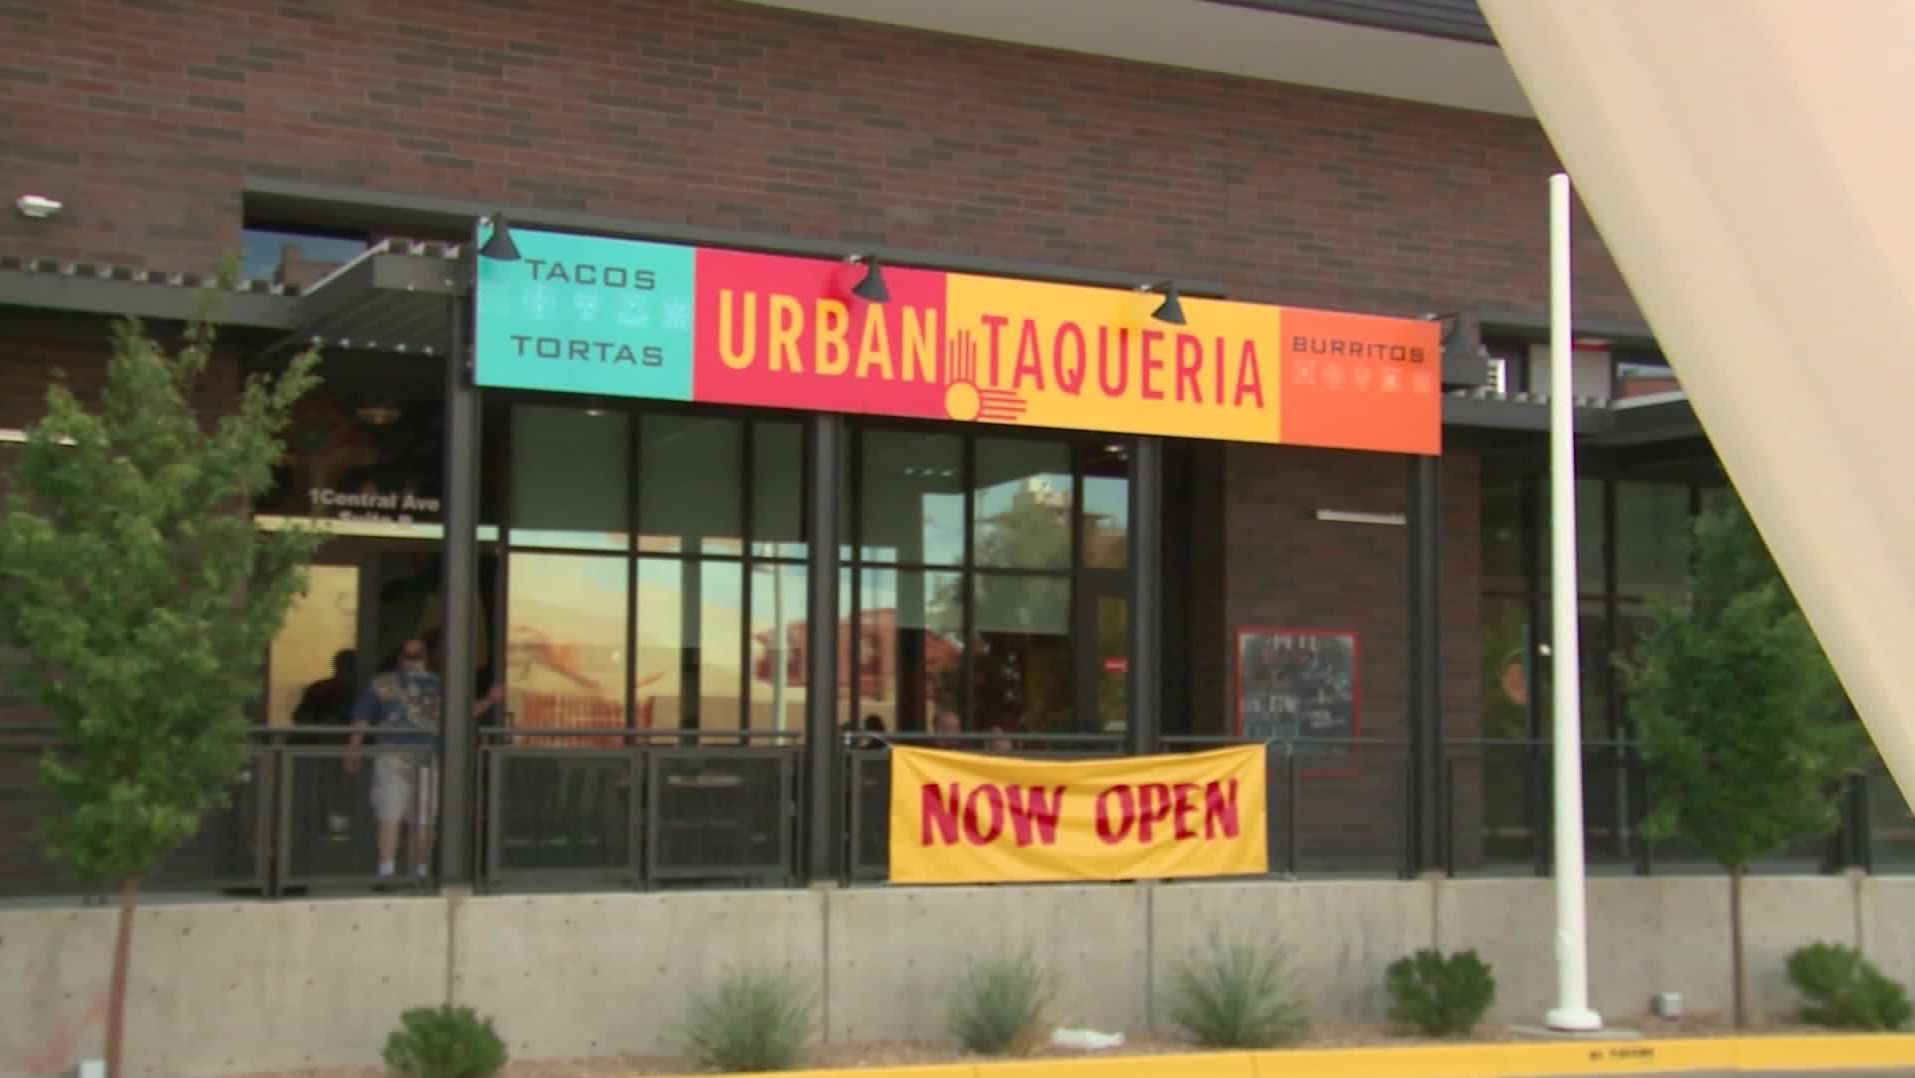 Urban Taqueria has some fun with its menu items, but not everyone finds it humorous.